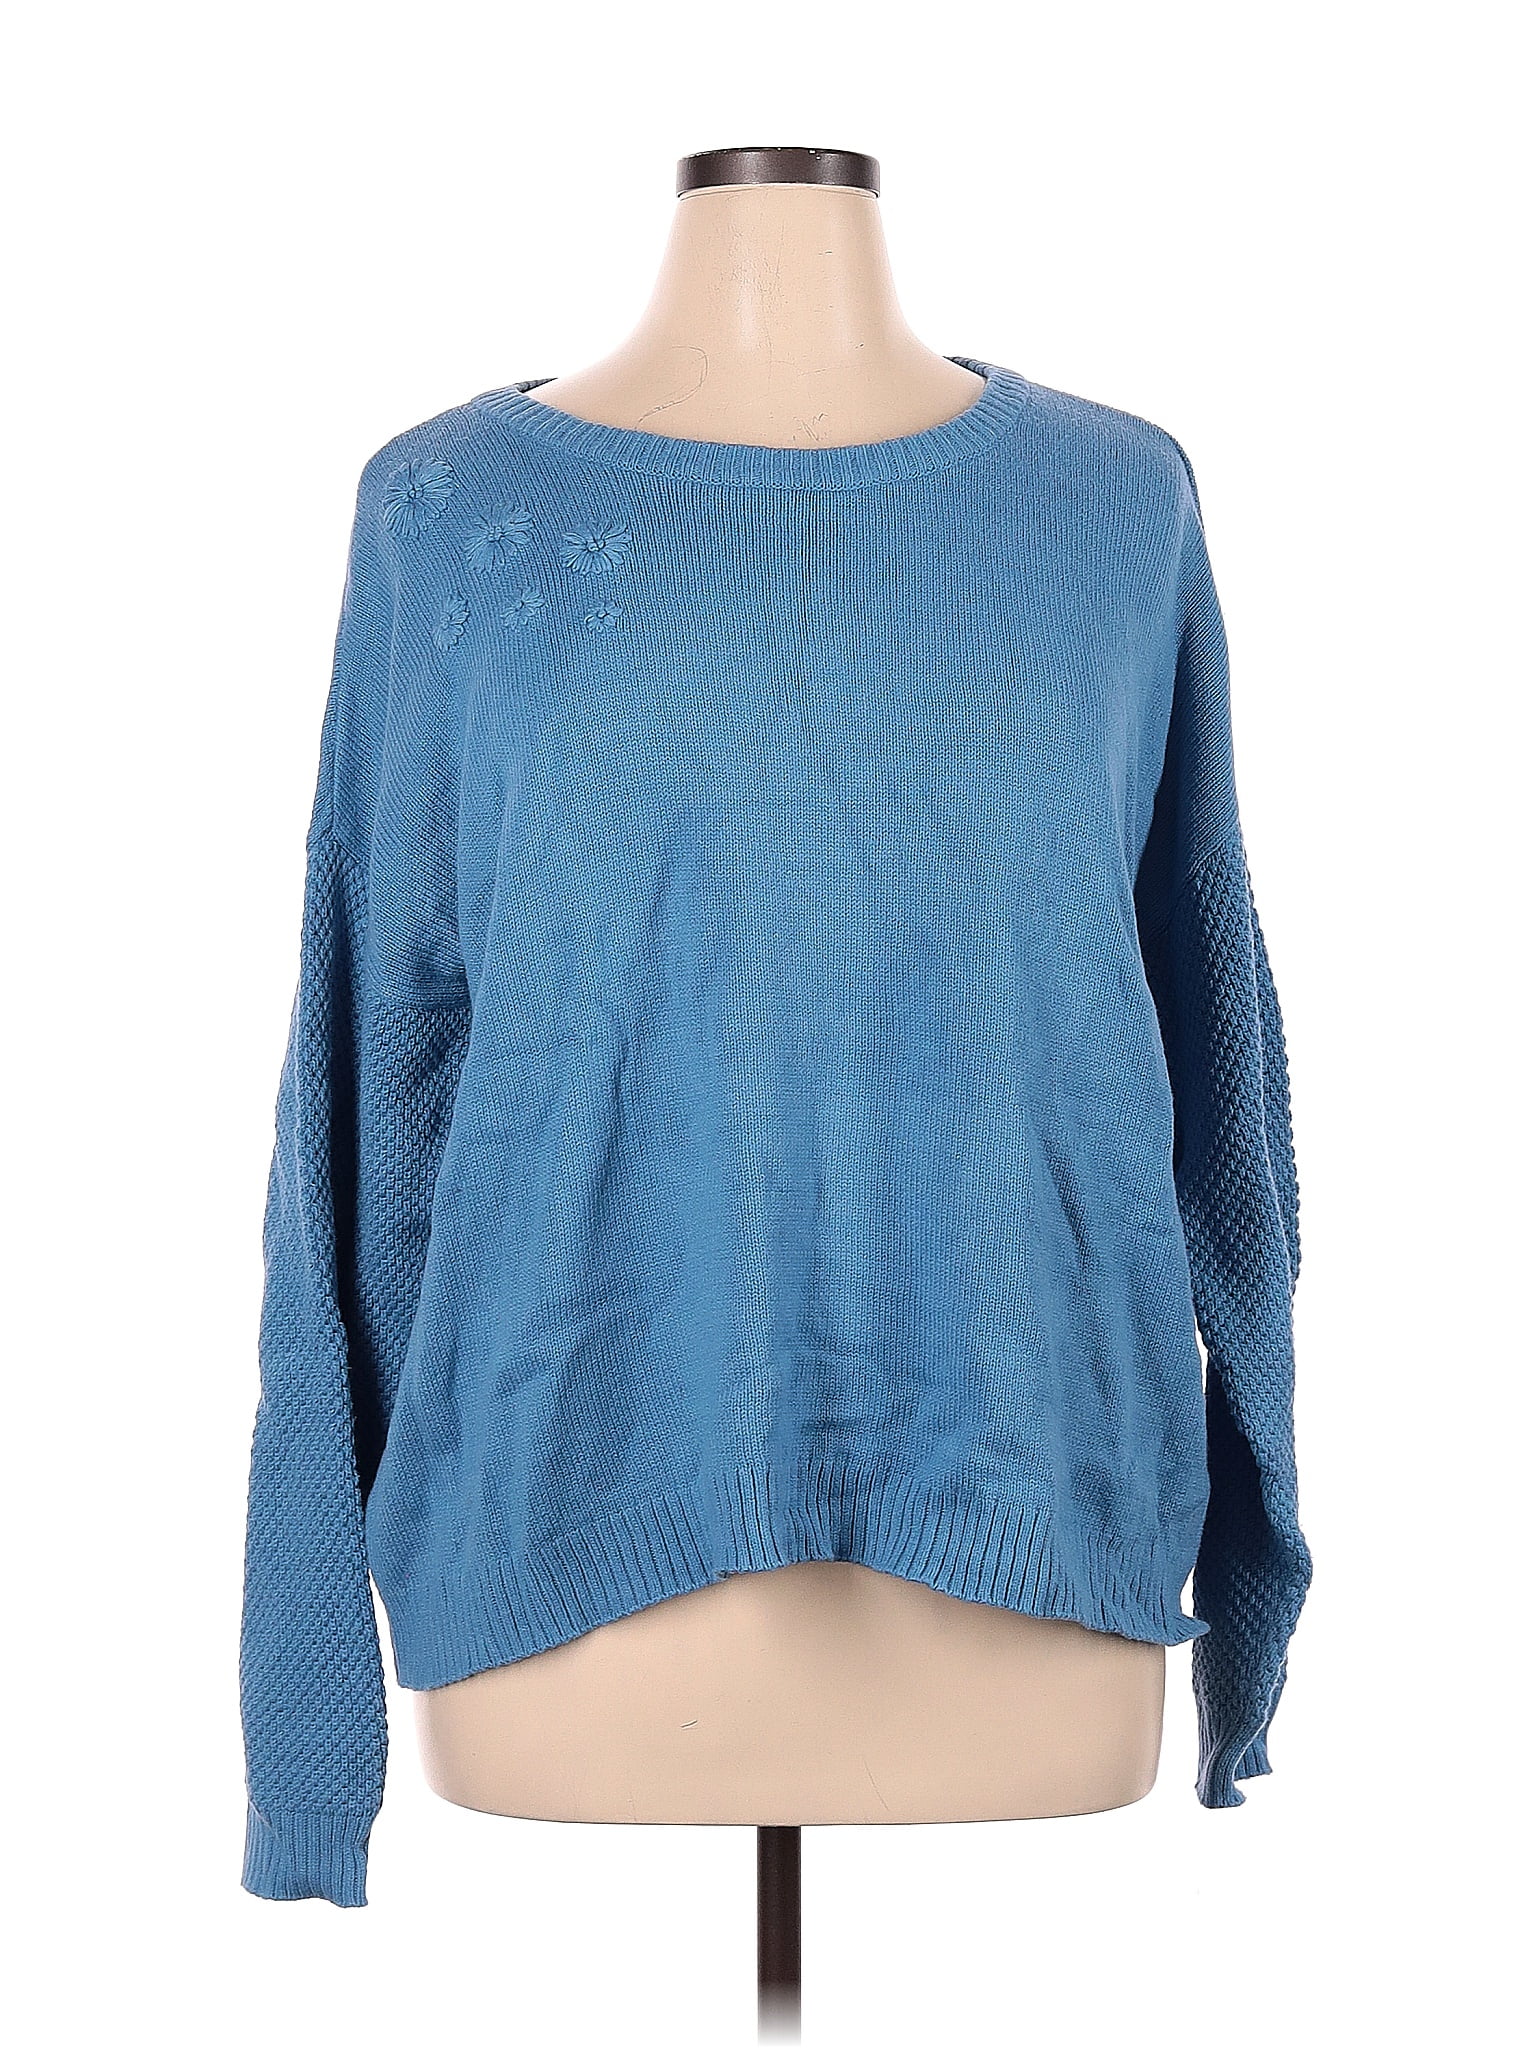 Candace Cameron Bure Color Block Solid Blue Pullover Sweater Size 1X ...